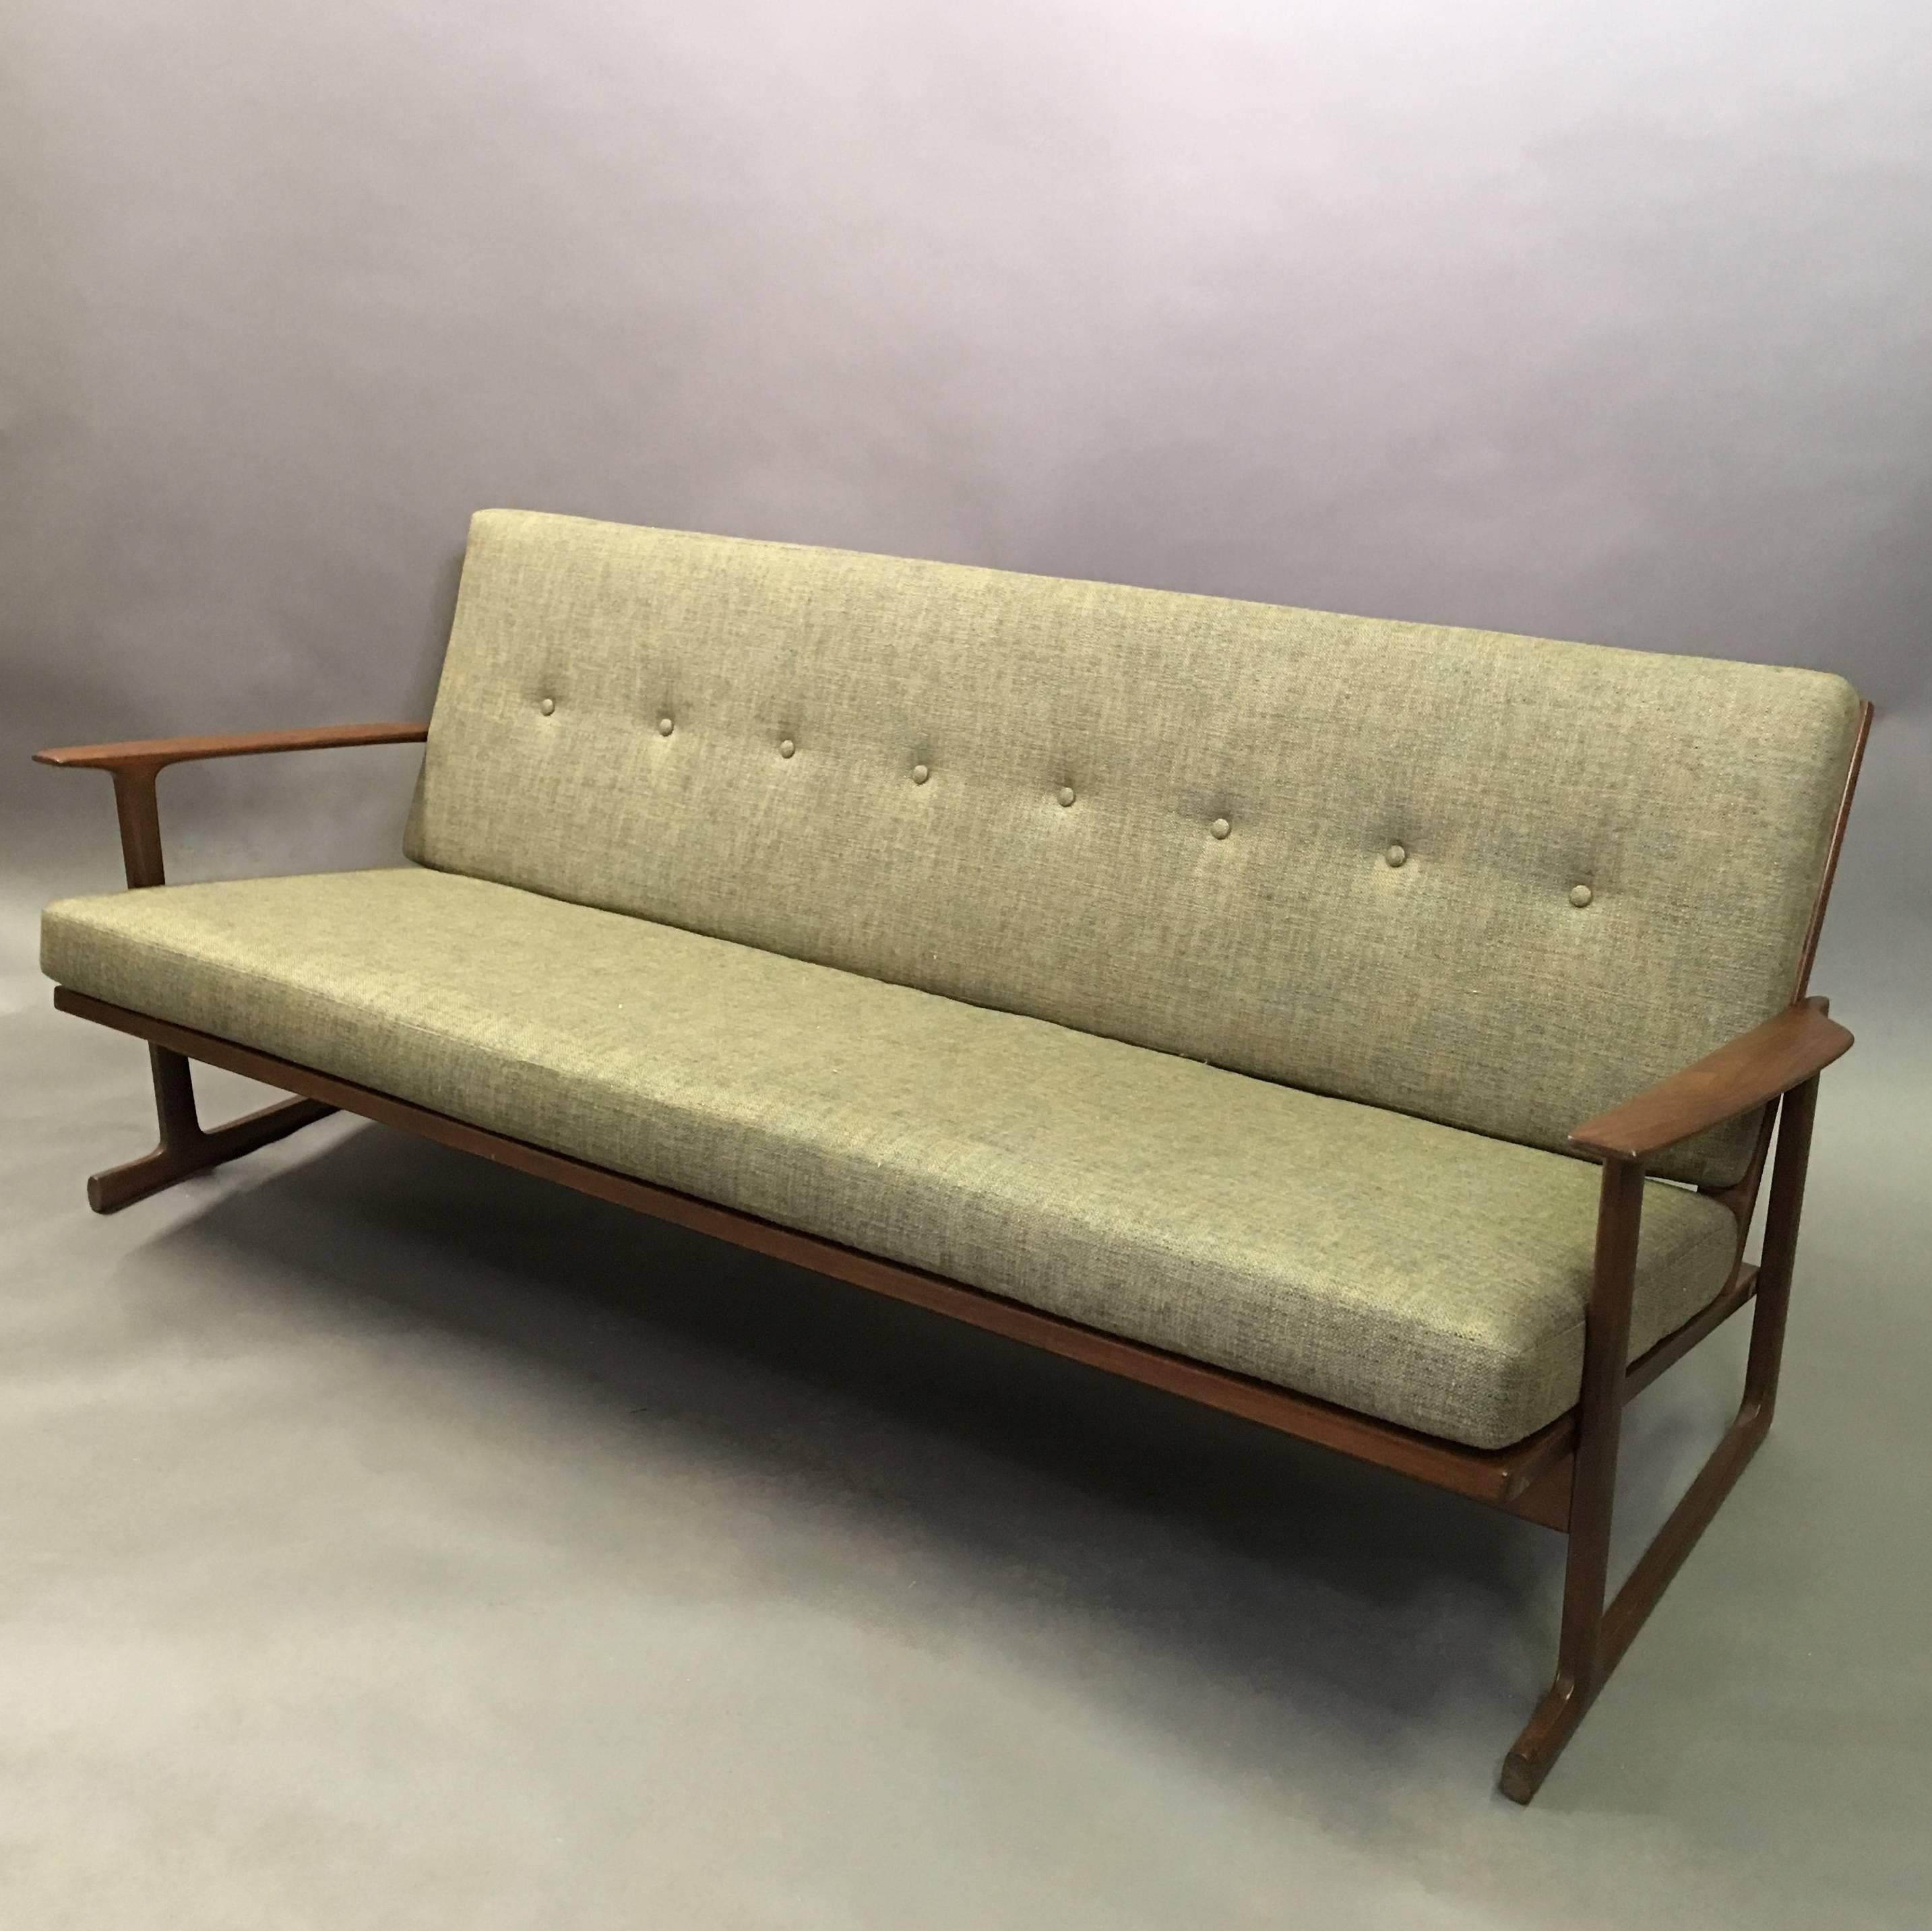 Midcentury, Danish modern, sofa designed by Ib Kofod-Larsen for Selig features a distinct, solid teak frame with lattice back and sleigh leg base, with newly upholstered cushions in a heather green cotton linen blend.